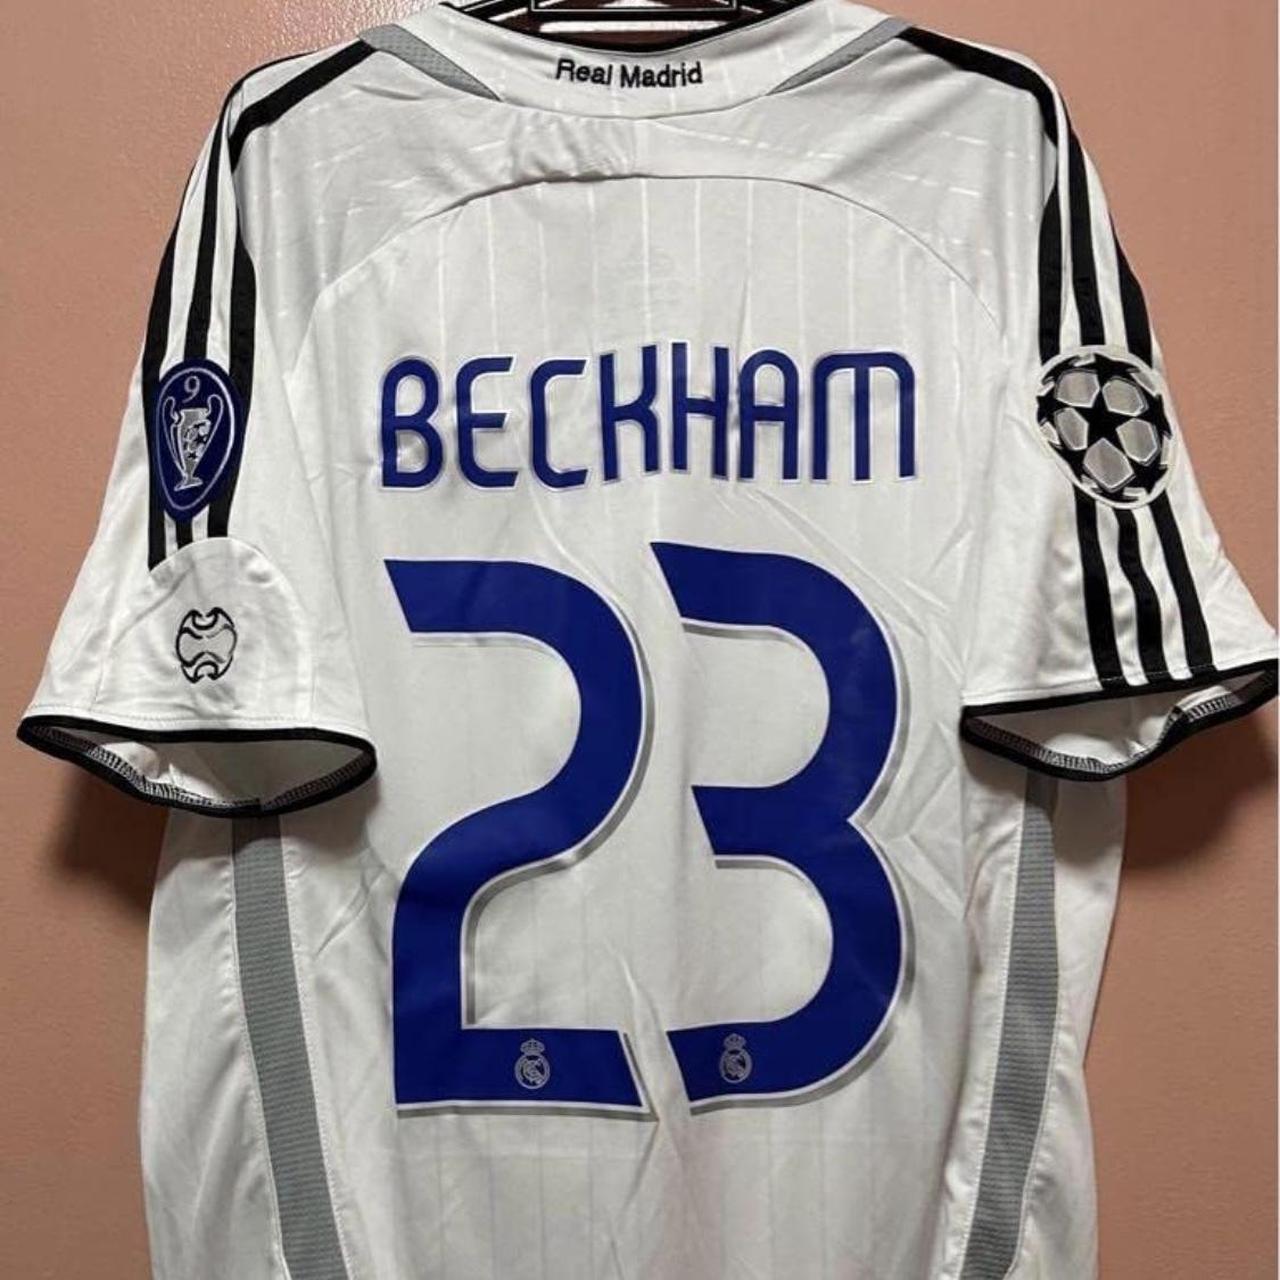 Beckham Real Madrid 2006-2007 Home Champions League